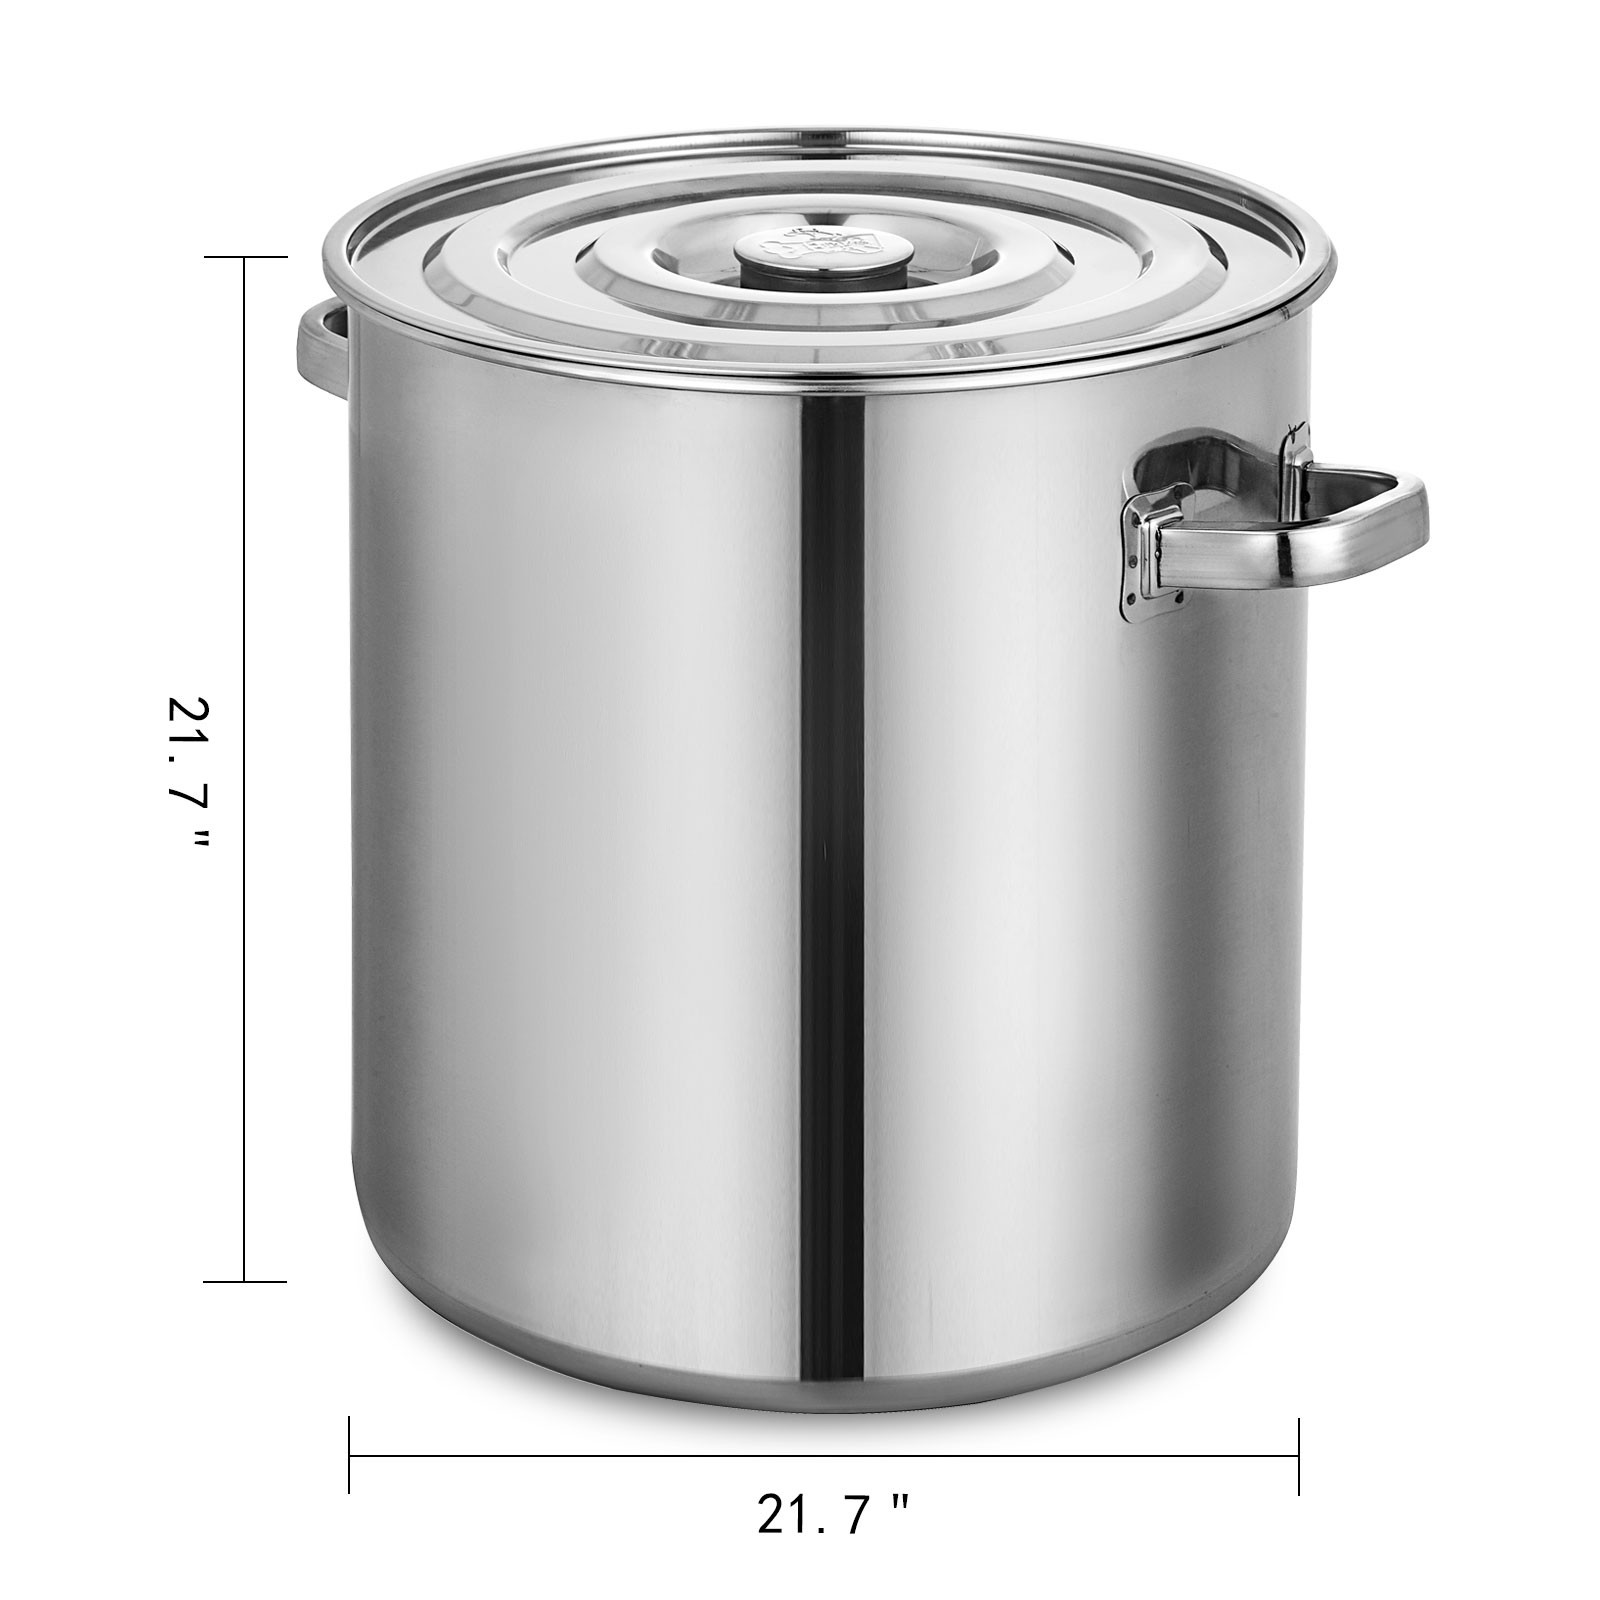 NEW 100 QT Quart Polished Stainless Steel Stock Pot Brewing Kettle Large w/ Lid 